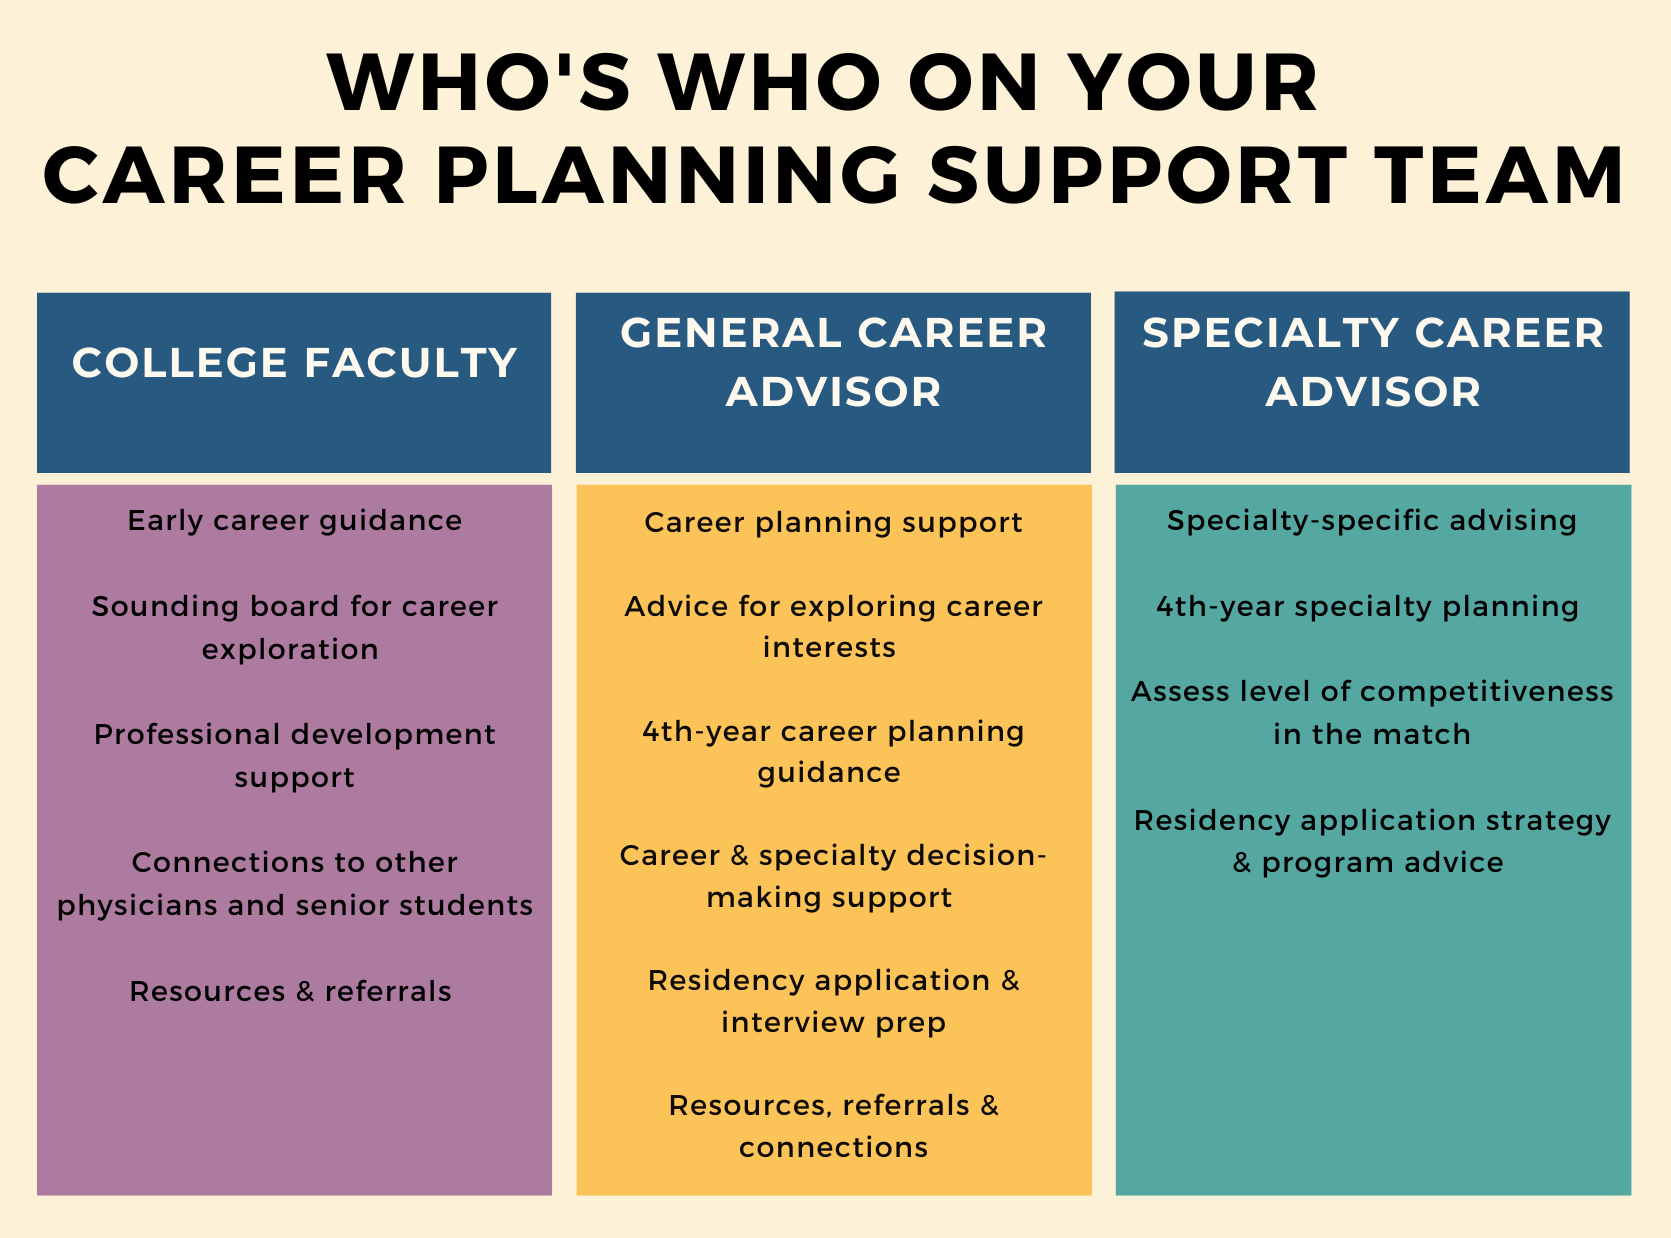 Chart explaining the roles of the three types of career planning supports